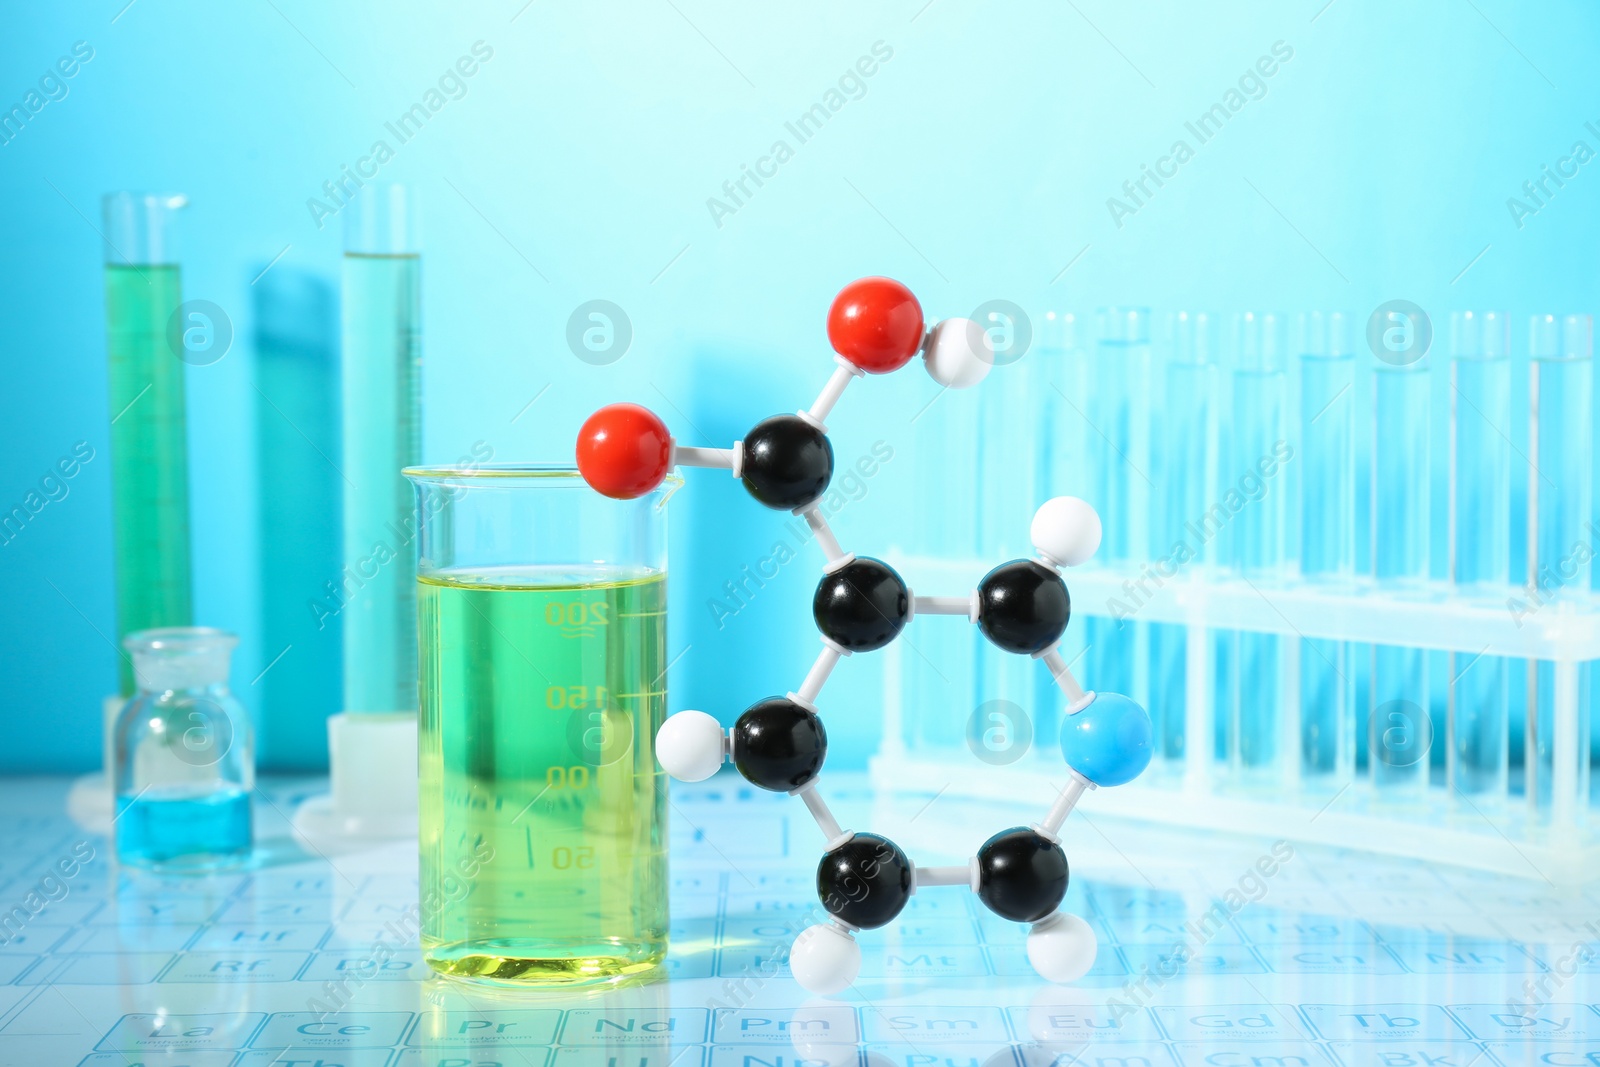 Photo of Molecular model and laboratory glassware against light blue background